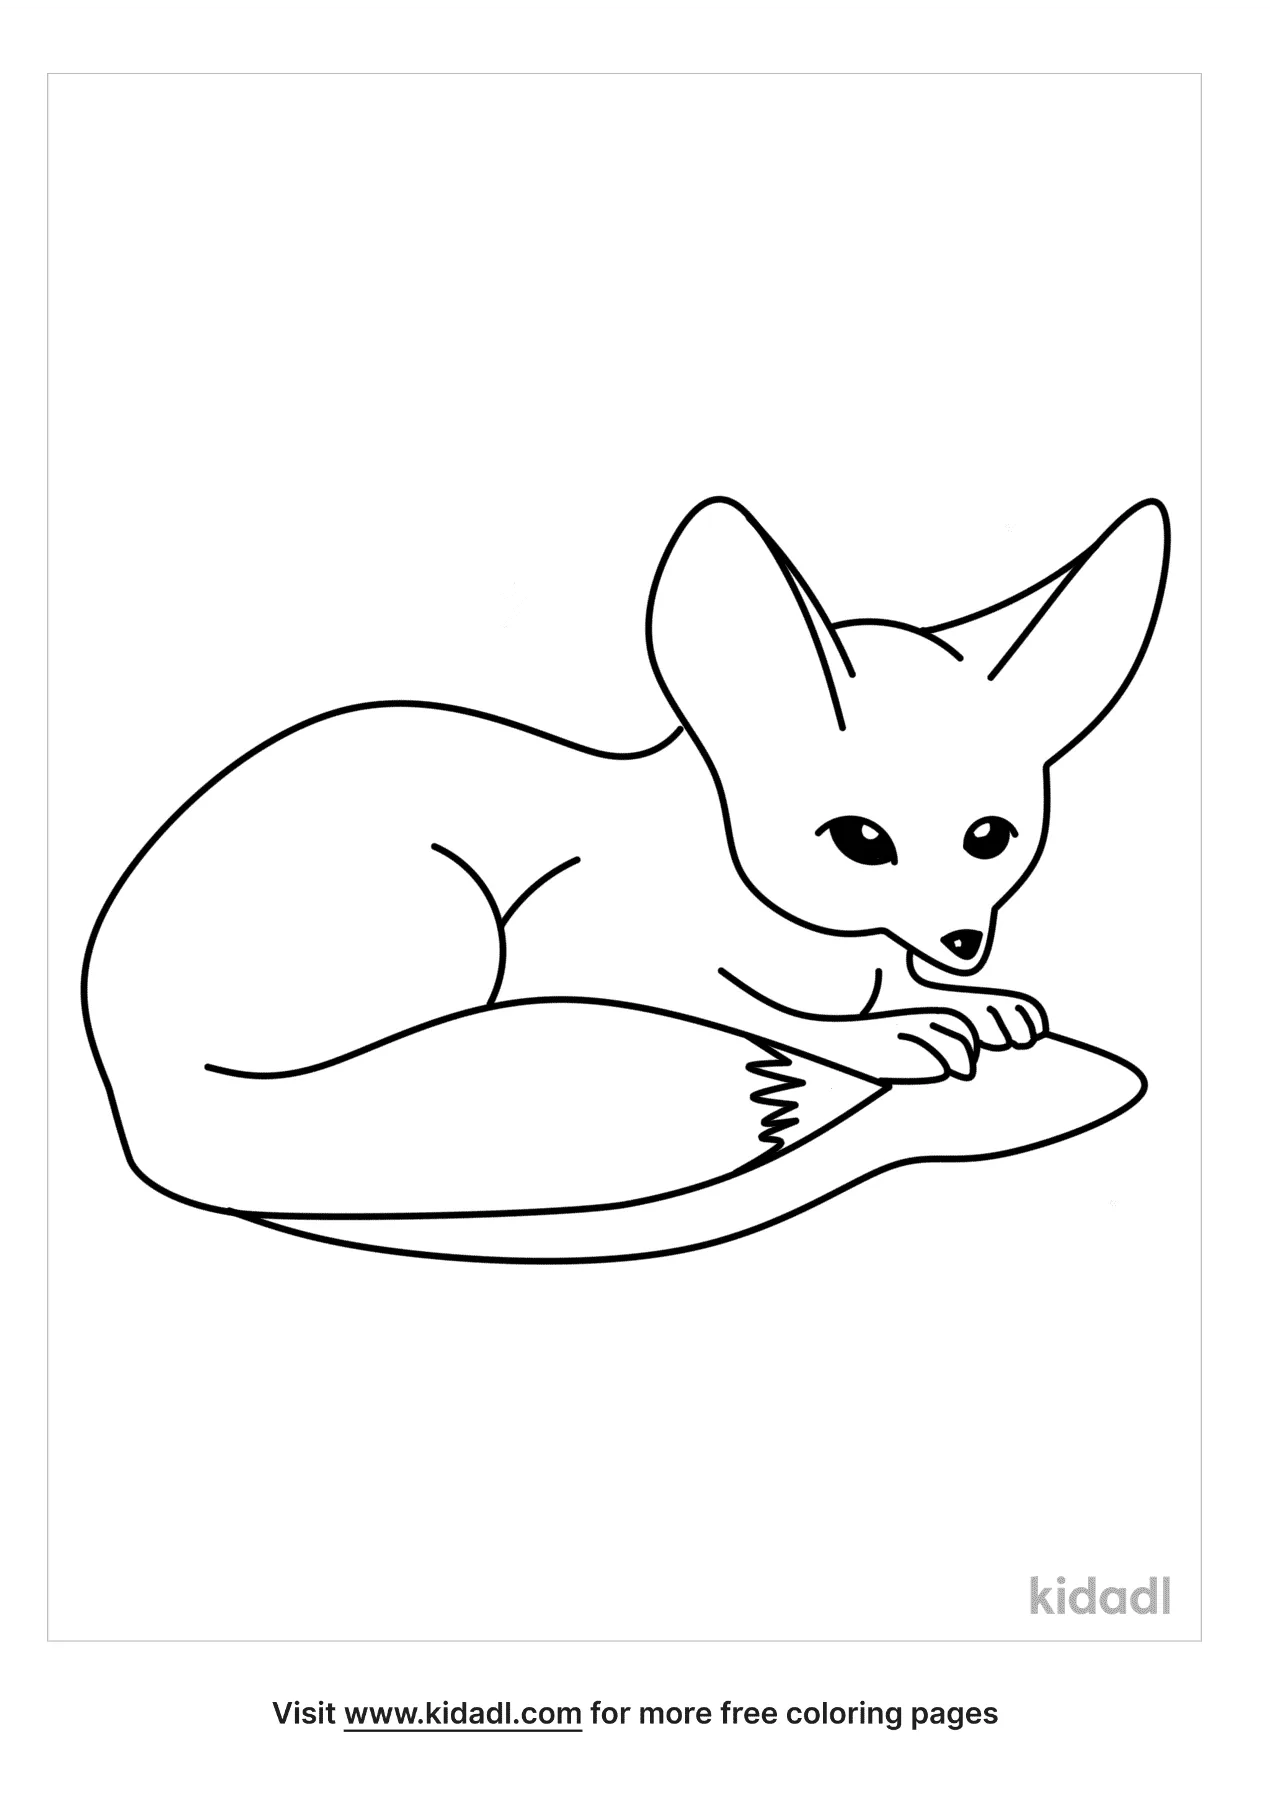 Fennec Fox Coloring Pages Free Animals Coloring Pages Kidadl